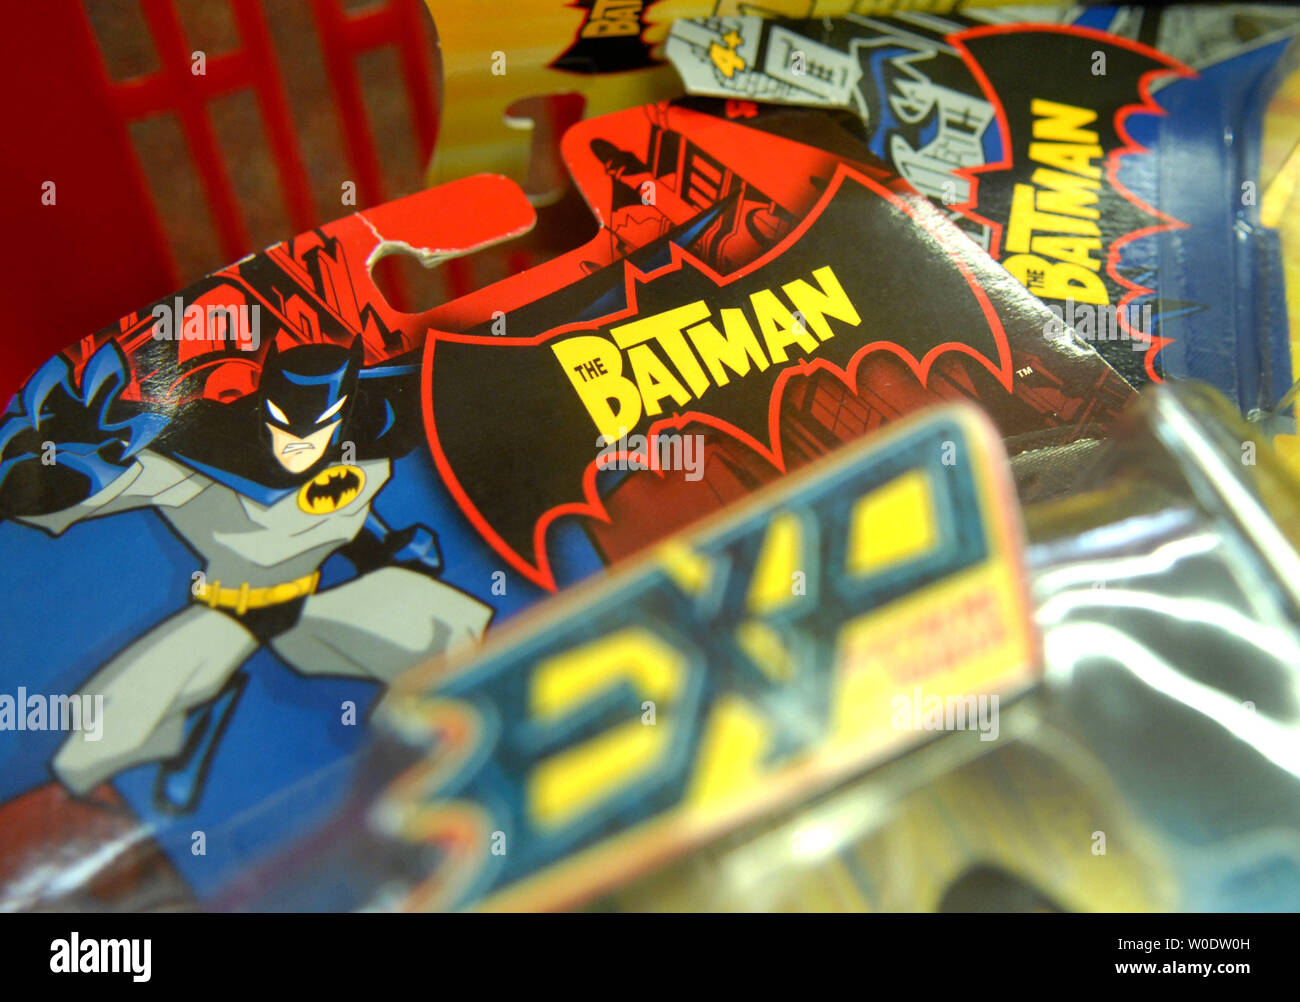 Batman action figures are seen in a basket at Kinder Haus Toy store in Arlington, Virginia on August 14, 2007. Mattel recalled 9 million Chinese made toys, including Polly Pocket play sets, Batman action figures, Fisher-Price toys and some die cast cars because of the presence of lead paint or their use of tiny magnets that could cause a choking hazard. This comes after Cheung Shu-hung, co-owner of A Lee Der Chinese Toy manufacturers, committed suicide at a warehouse following a Chinese ban. (UPI Photo/Kevin Dietsch) Stock Photo